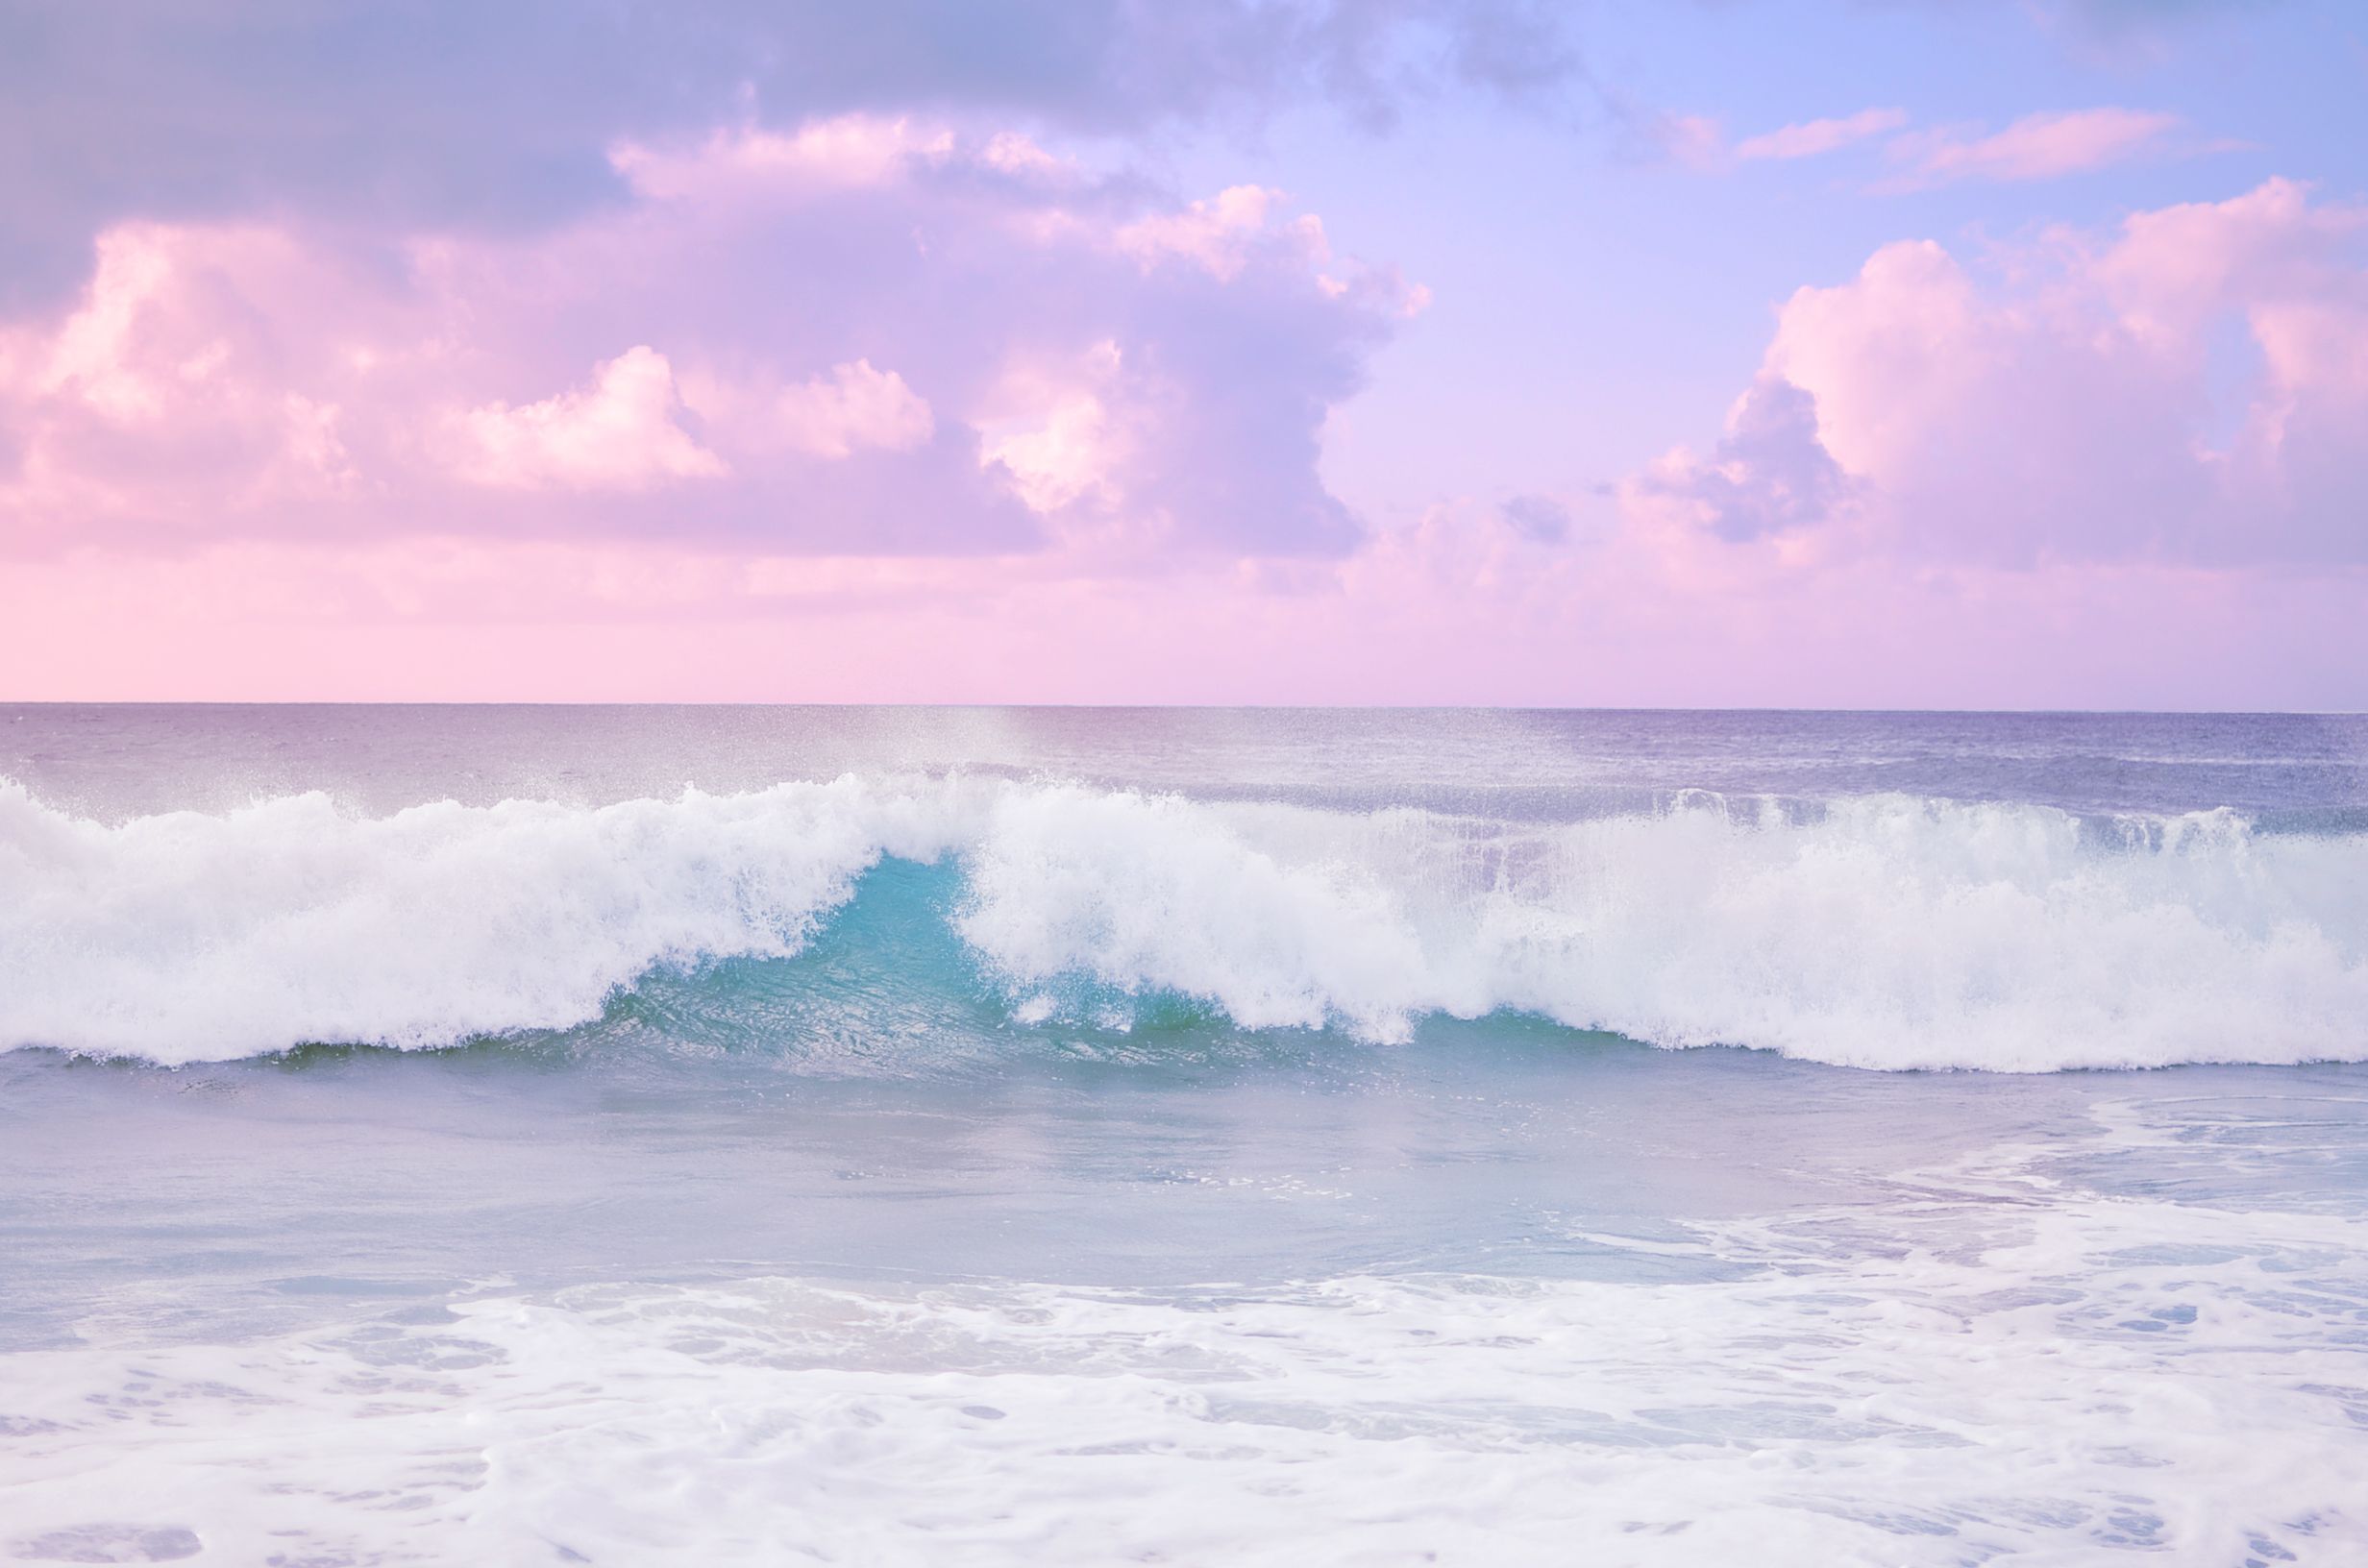 A wave crashes on the beach at sunset - Beach